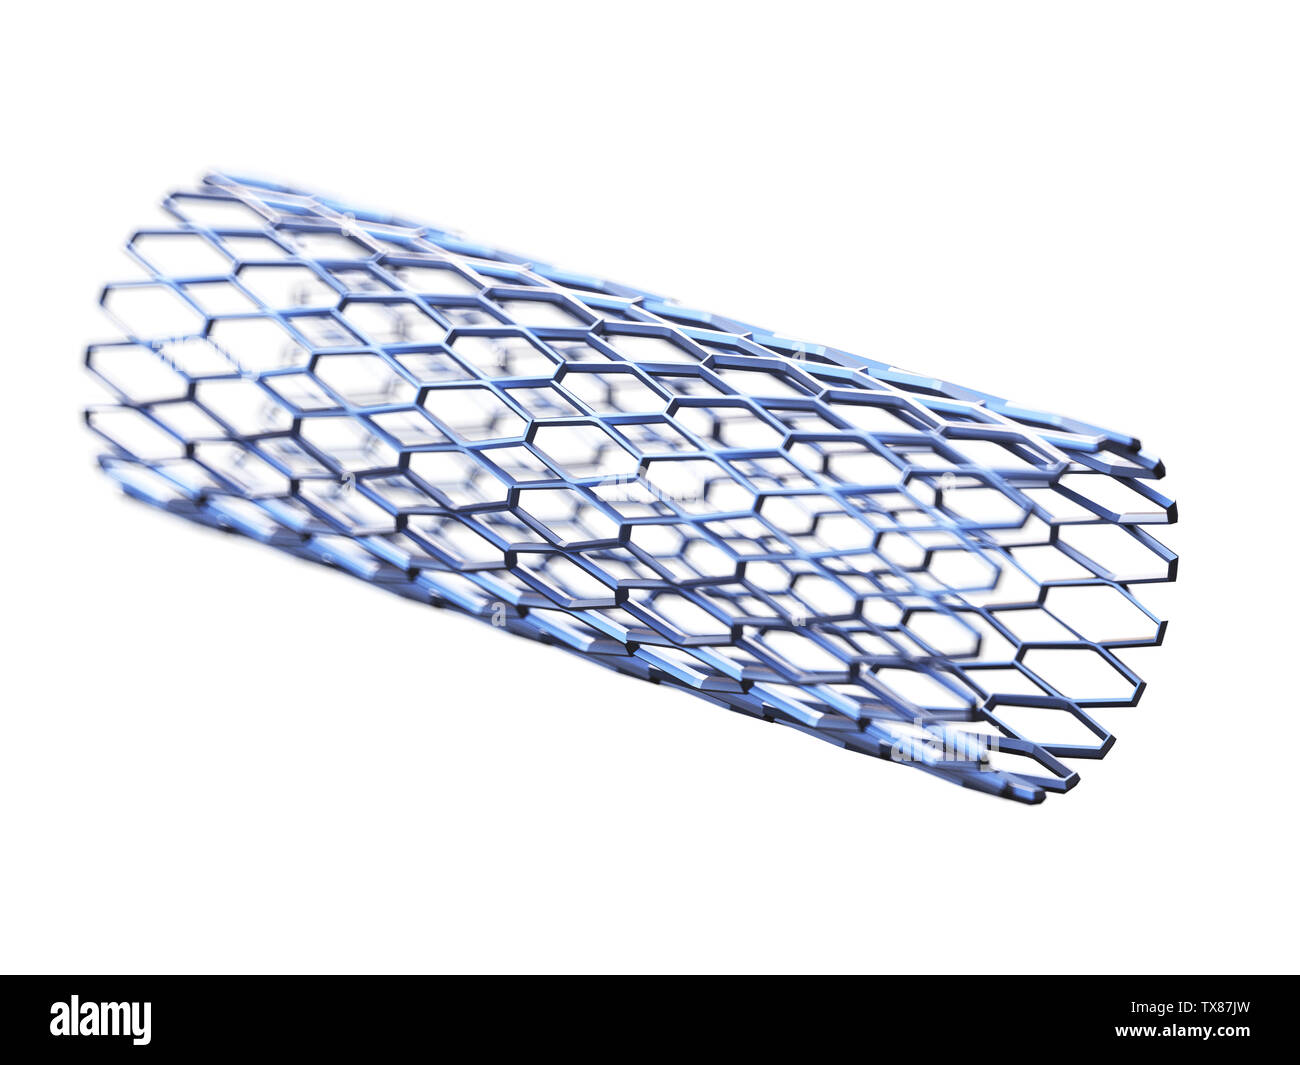 Stent High Resolution Stock Photography and Images - Alamy